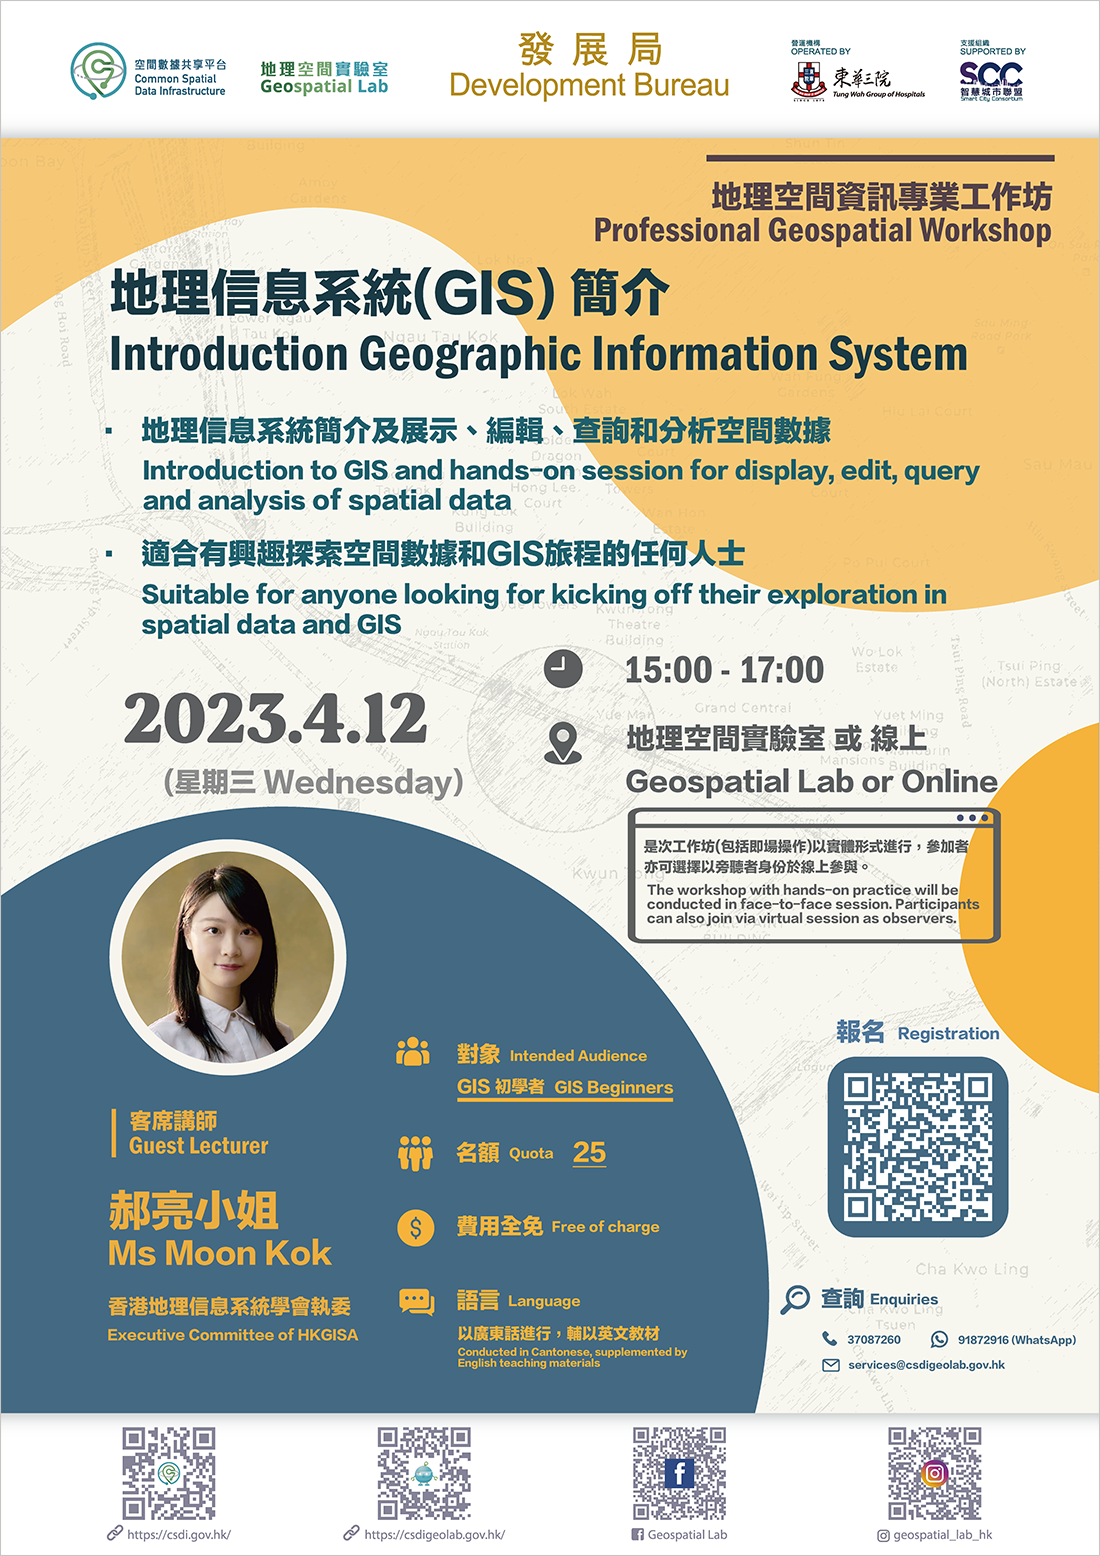 Professional Geospatial Workshop "Introduction to Geographic Information System (GIS)"